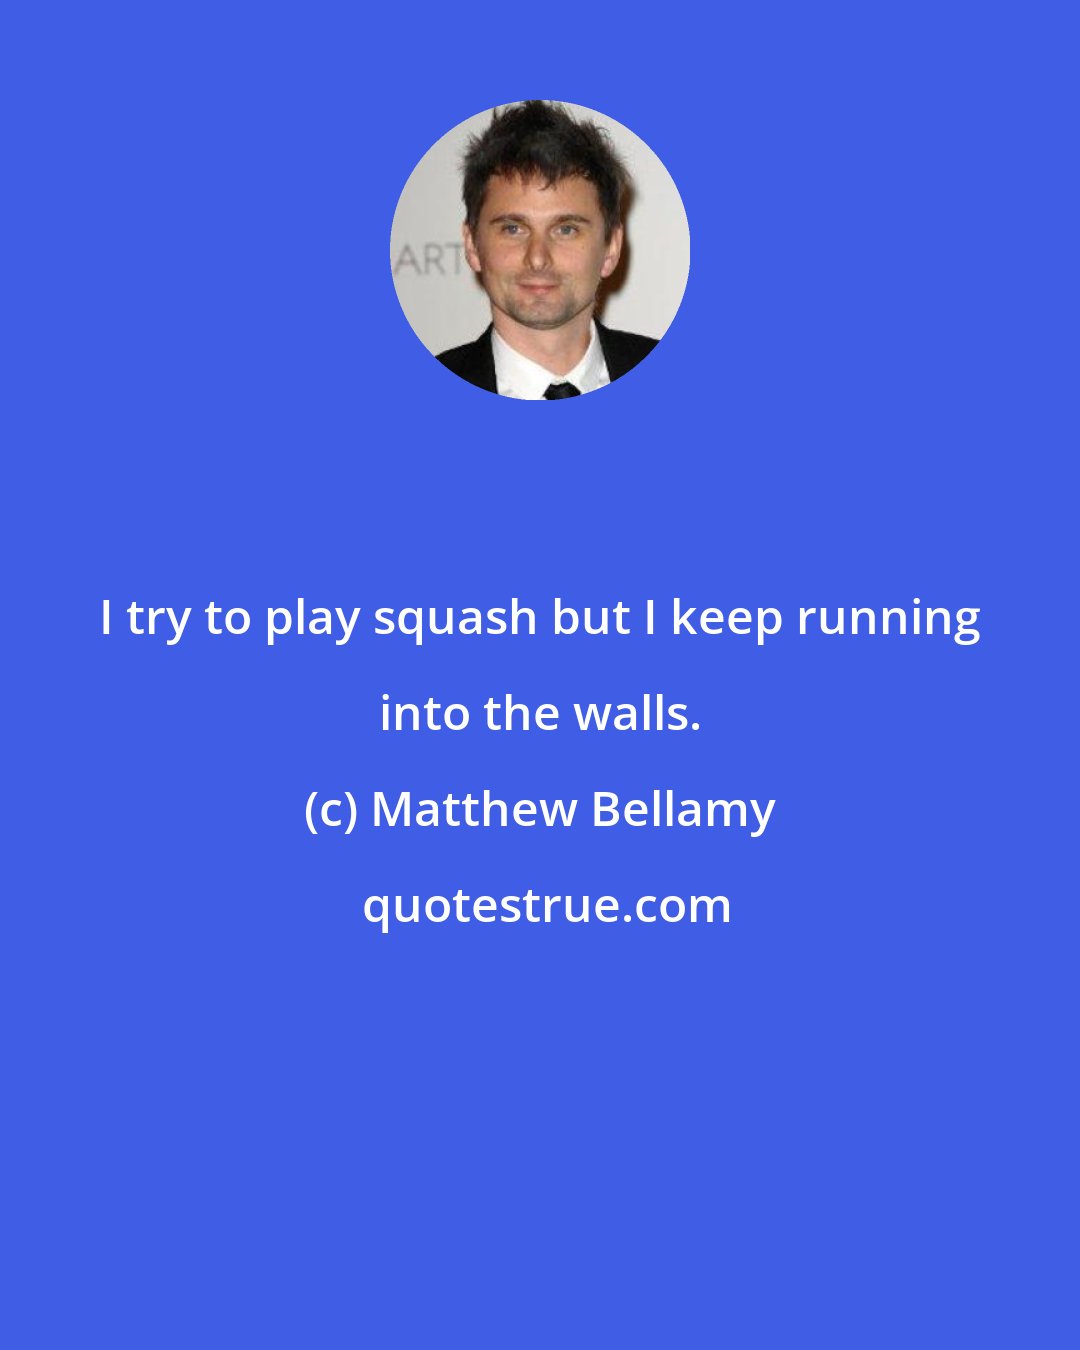 Matthew Bellamy: I try to play squash but I keep running into the walls.